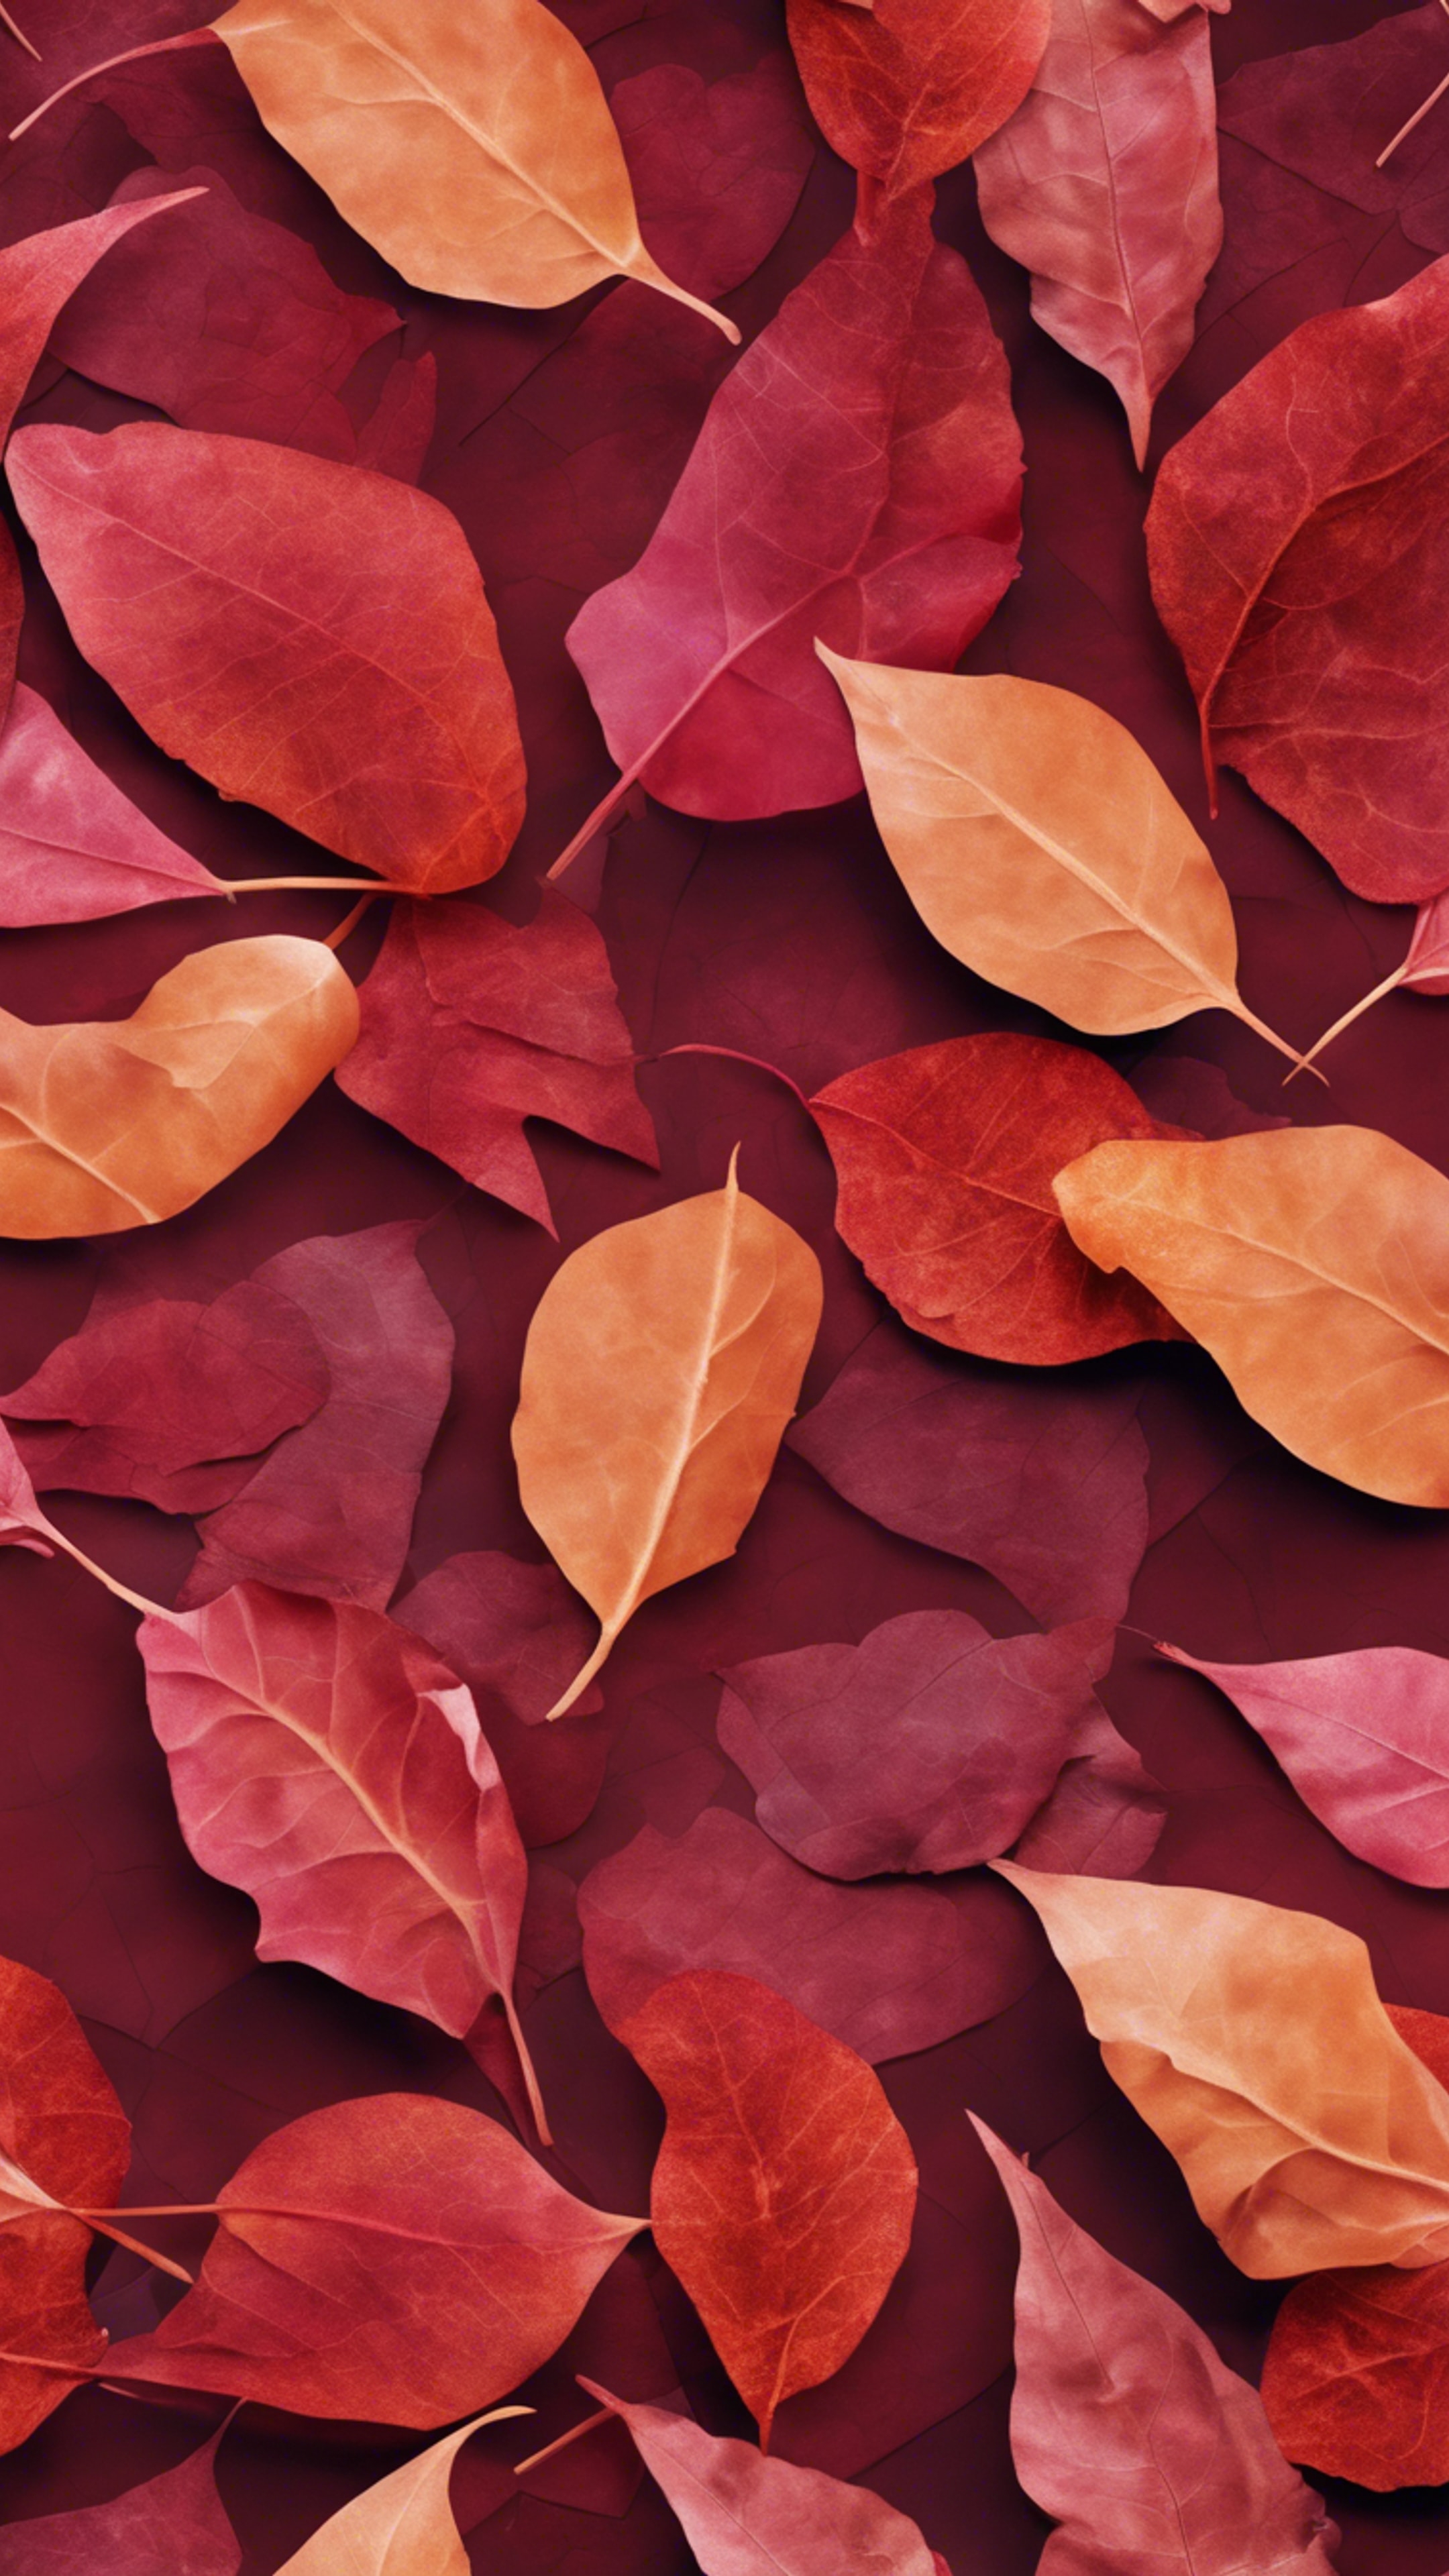 An abstract, tessellating pattern of fiery ruby and russet shapes, reminiscent of falling leaves in autumn. Papel de parede[1bca3c6cf9b9400393d6]